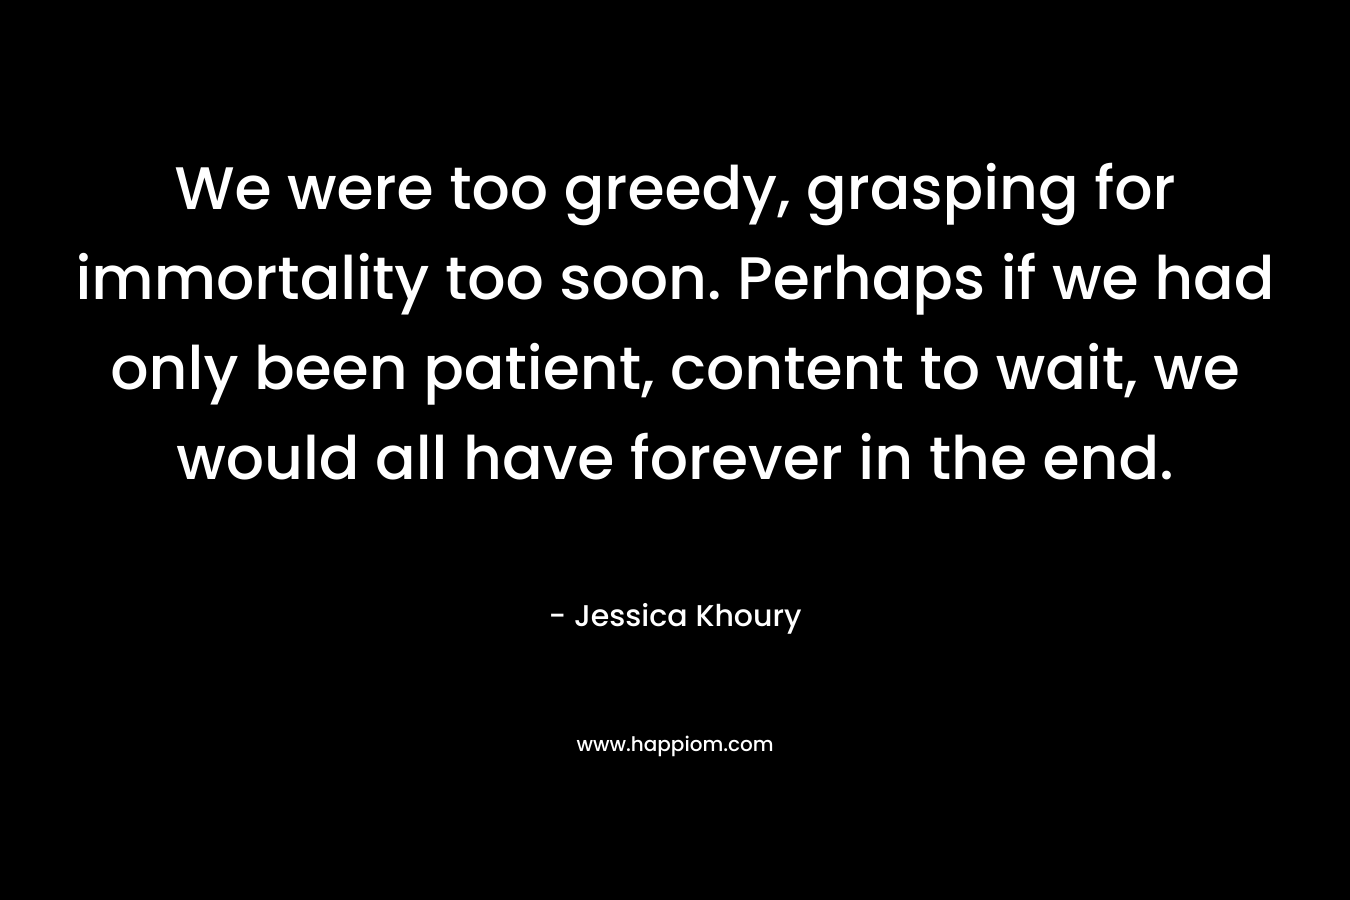 We were too greedy, grasping for immortality too soon. Perhaps if we had only been patient, content to wait, we would all have forever in the end. – Jessica Khoury